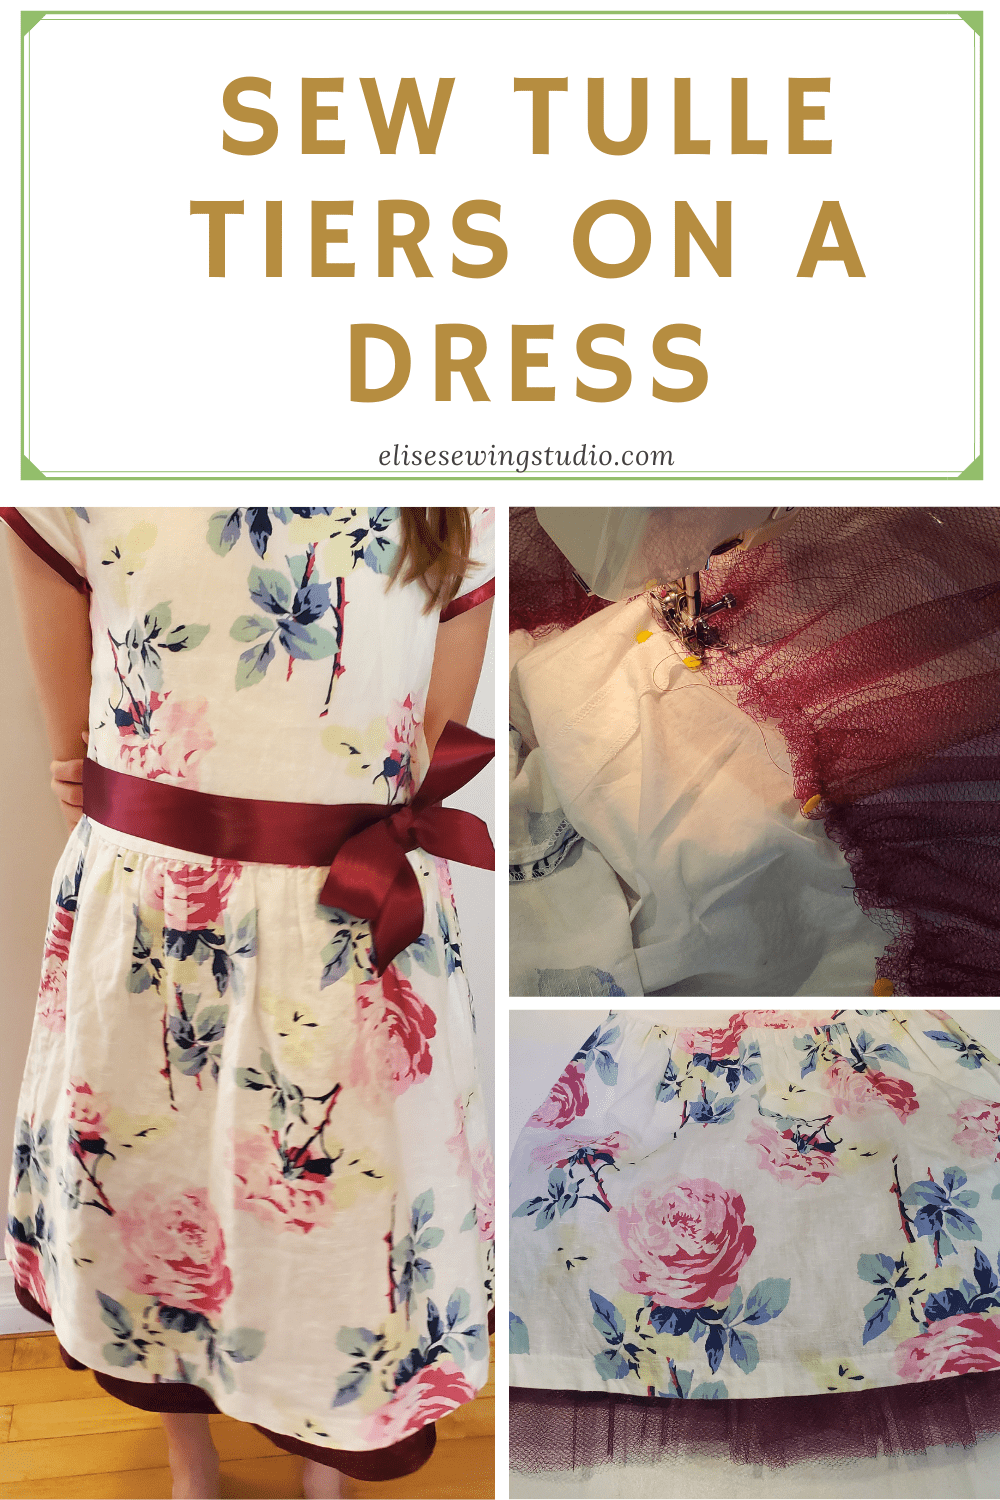 Sew Tulle Tiers on a Dress